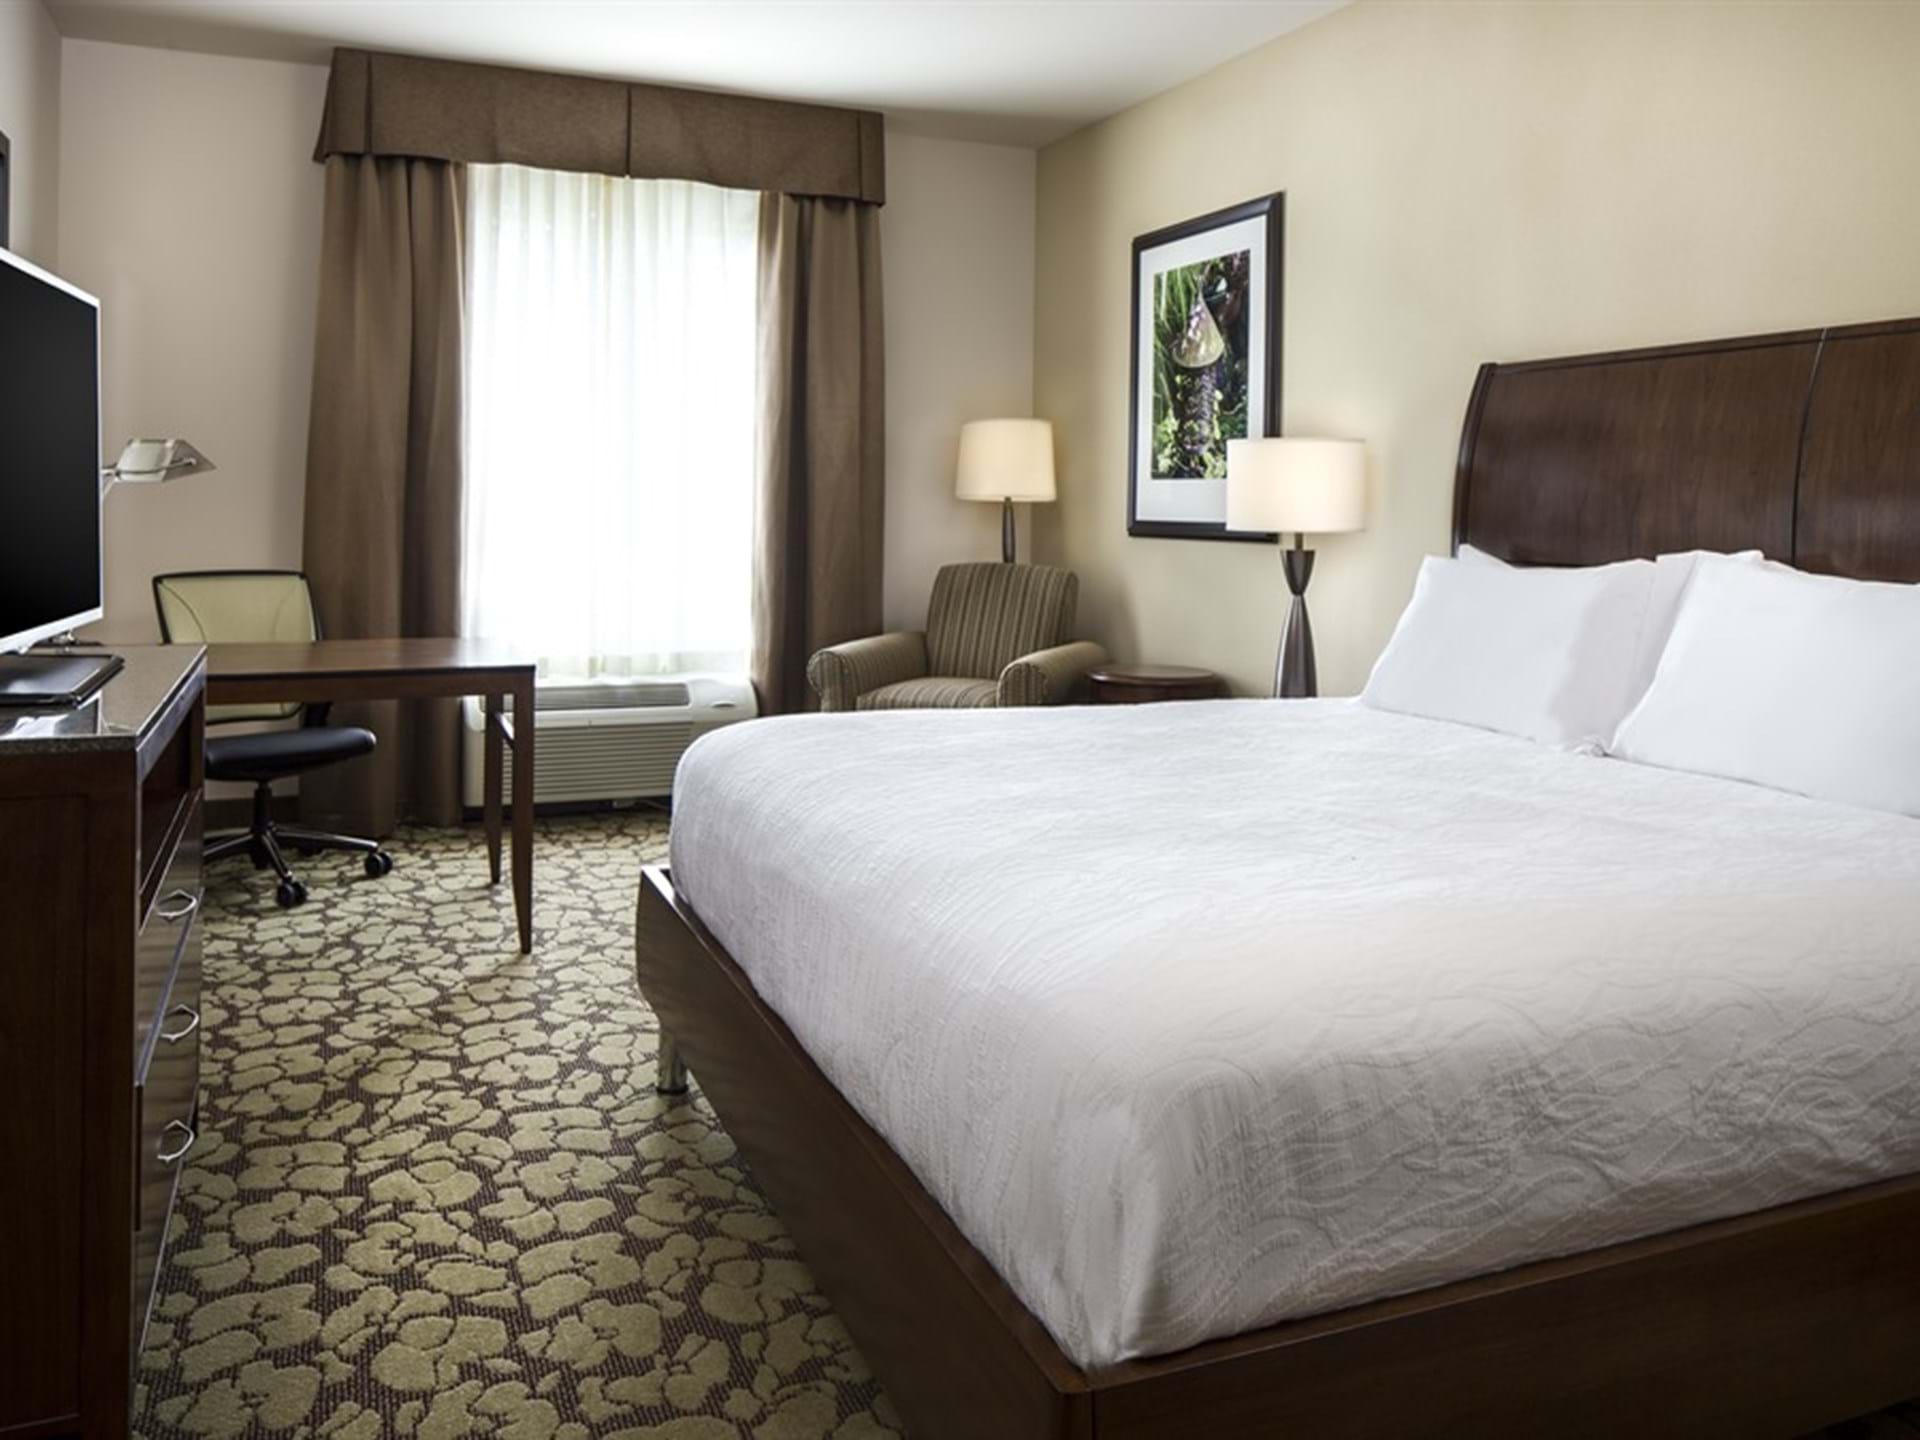 Spacious guestrooms with free wi-fi